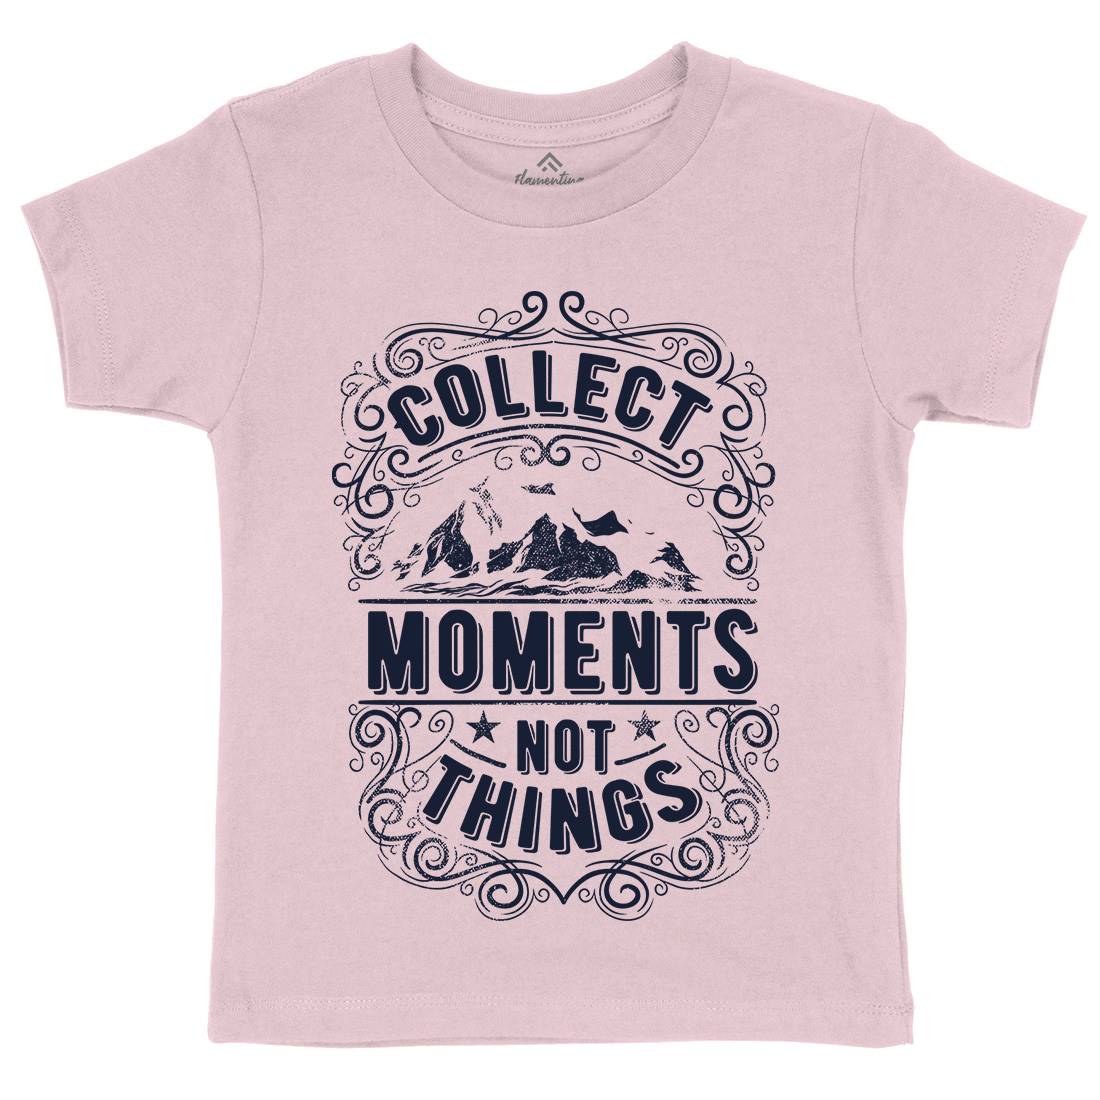 Collect Moments Not Things Kids Crew Neck T-Shirt Quotes C918